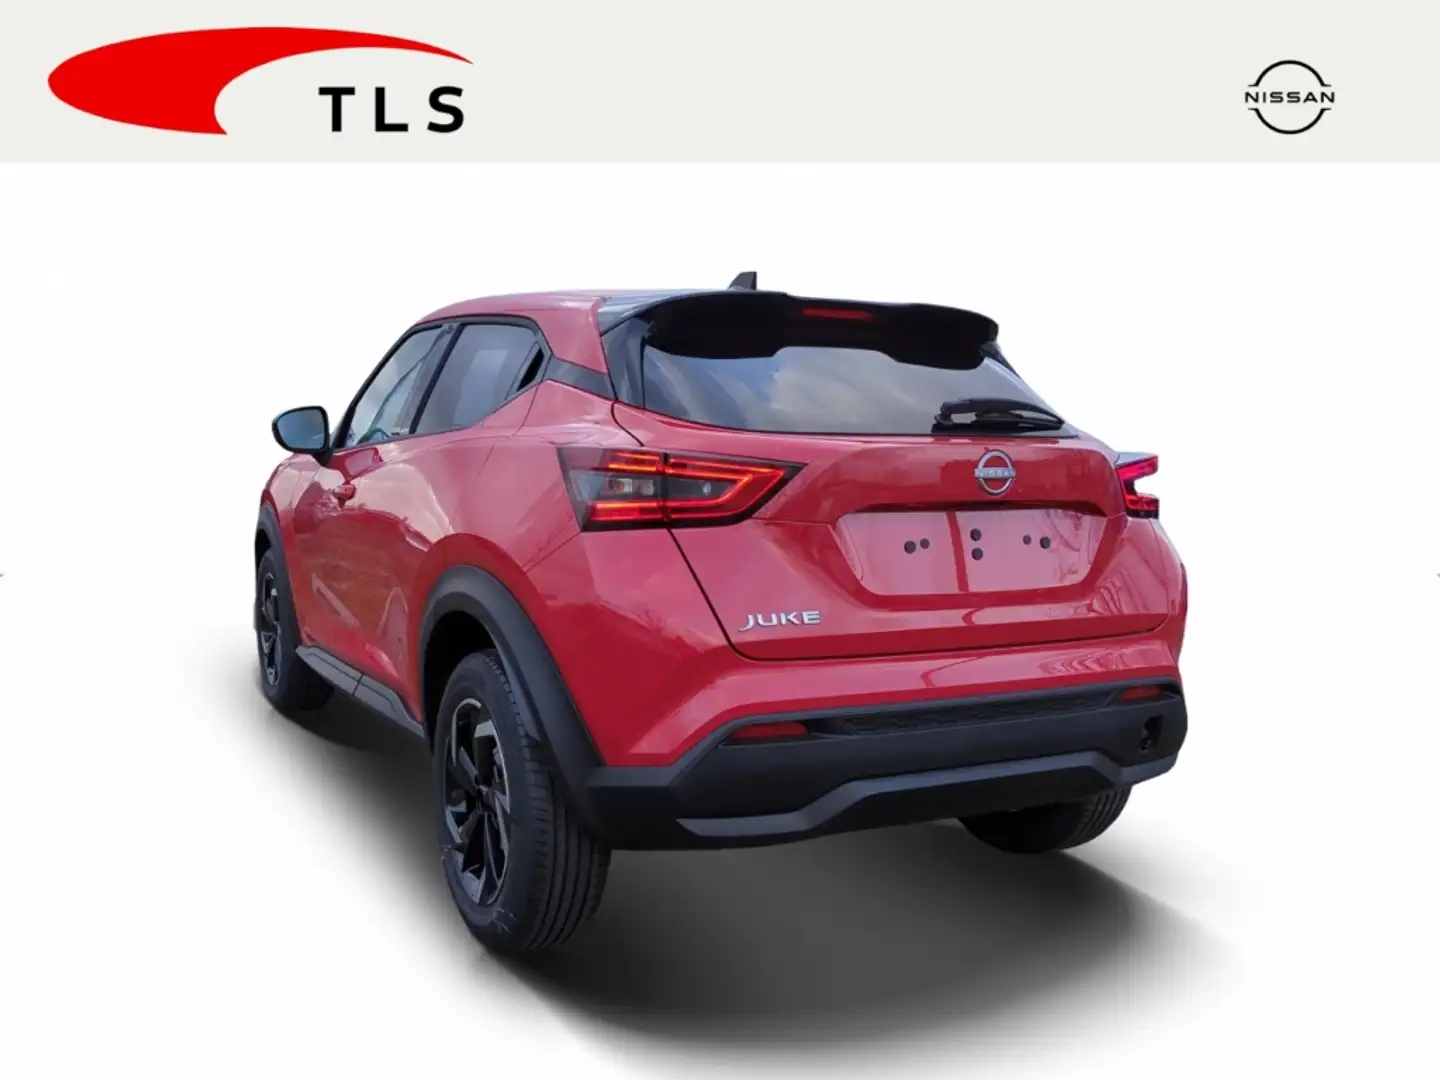 Nissan Juke N-STYLE - 1.0 DIG-T - 114PS - SOLID RED Piros - 2